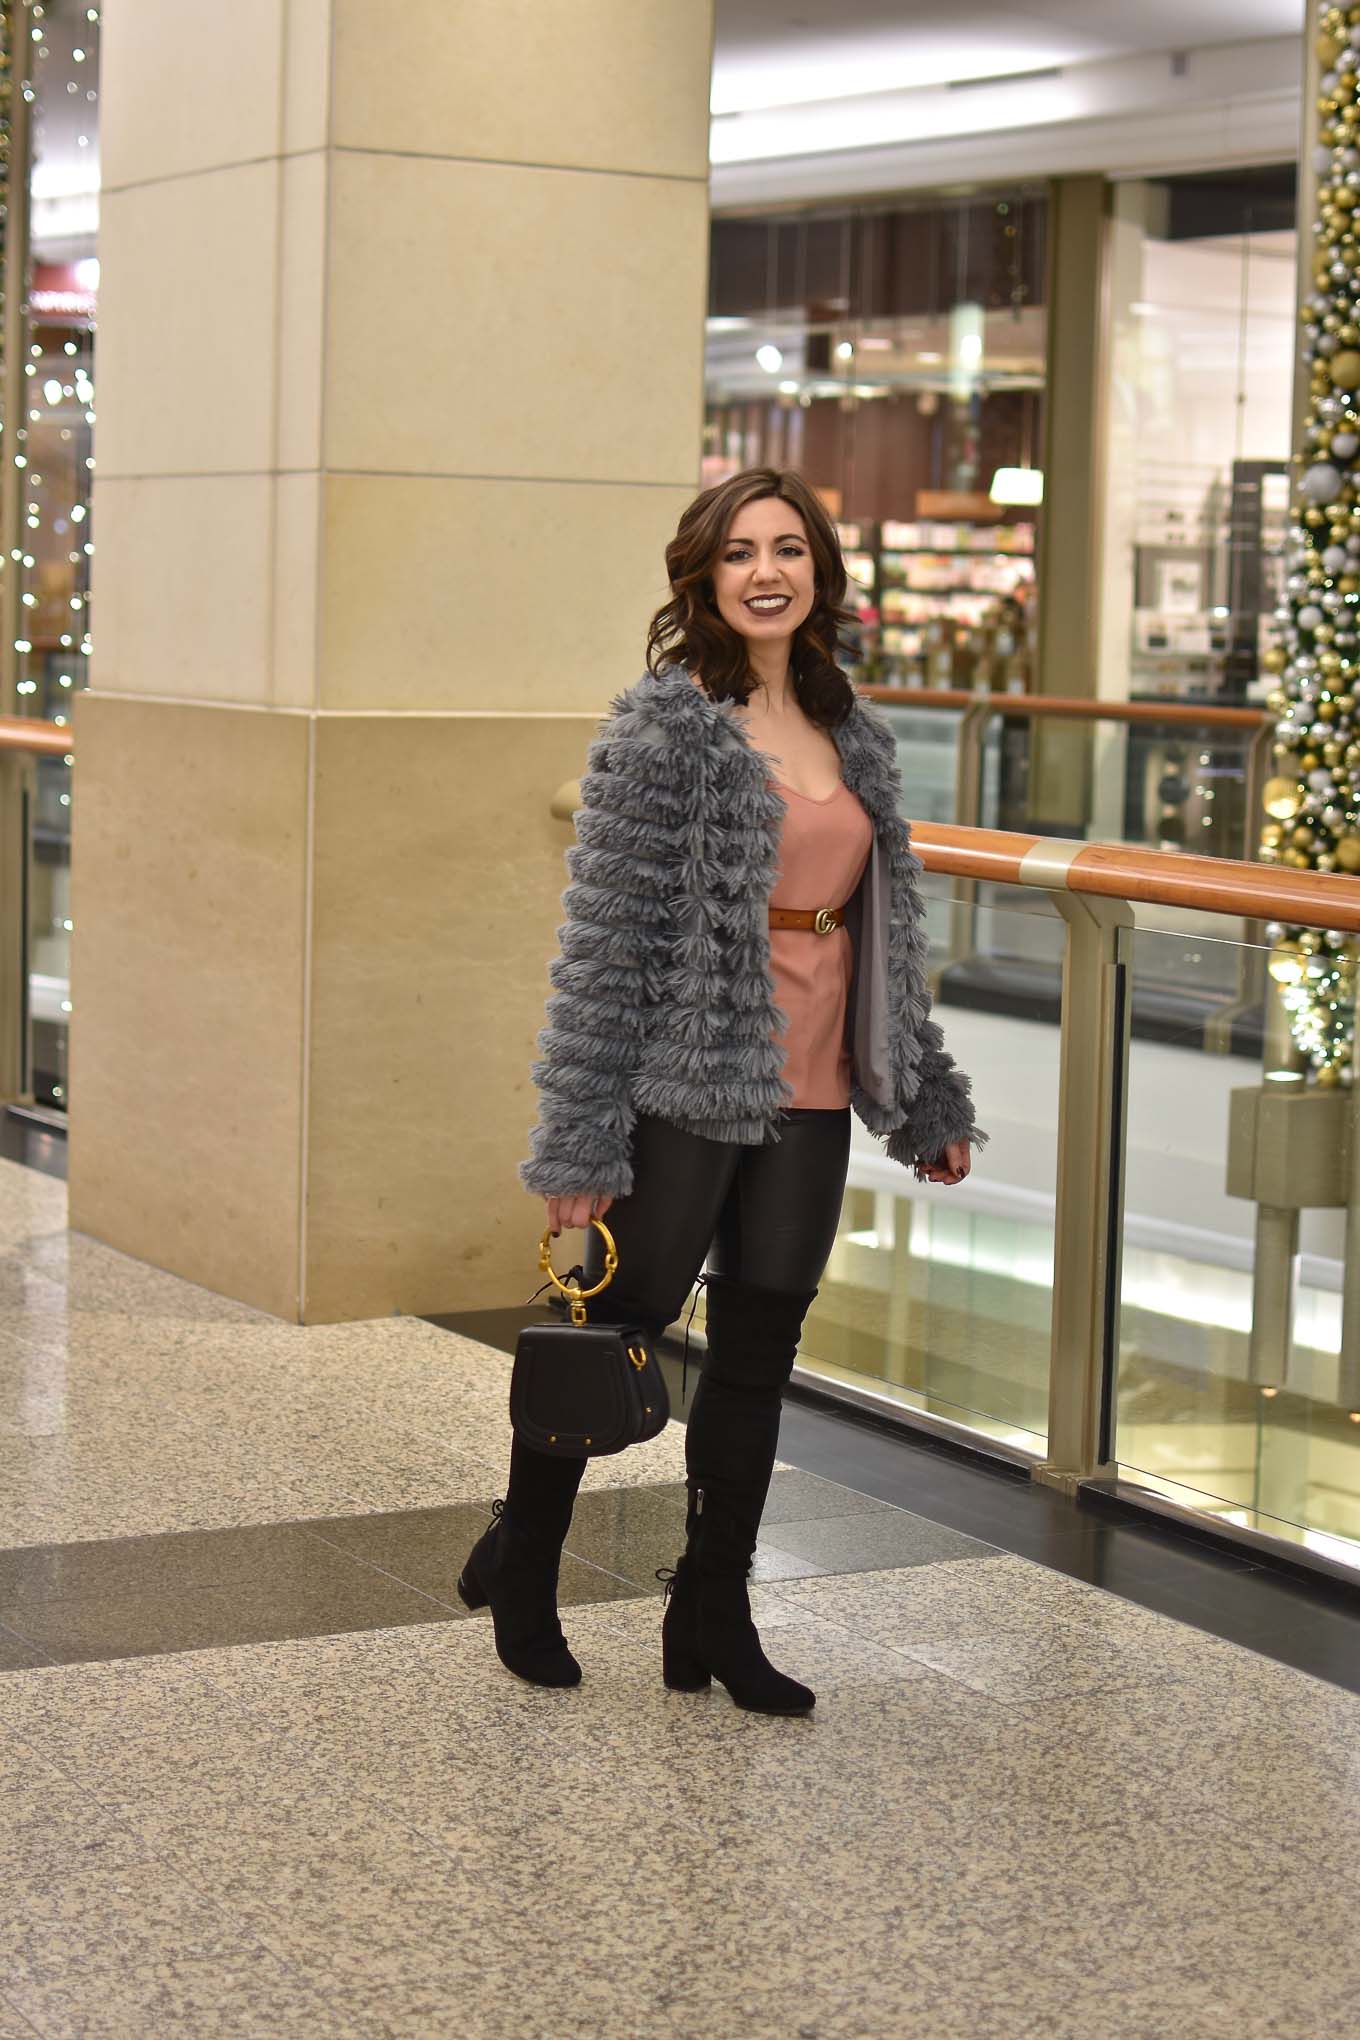 Lifestyle blogger Roxanne of Glass of Glam wearing an Amazon fashion faux fur jacket, faux leather leggings, Chloe Nile bag, otk boots, and Gerard Cosmetics lipstick - Faux Leather leggings by popular Chicago fashion blogger Glass of Glam